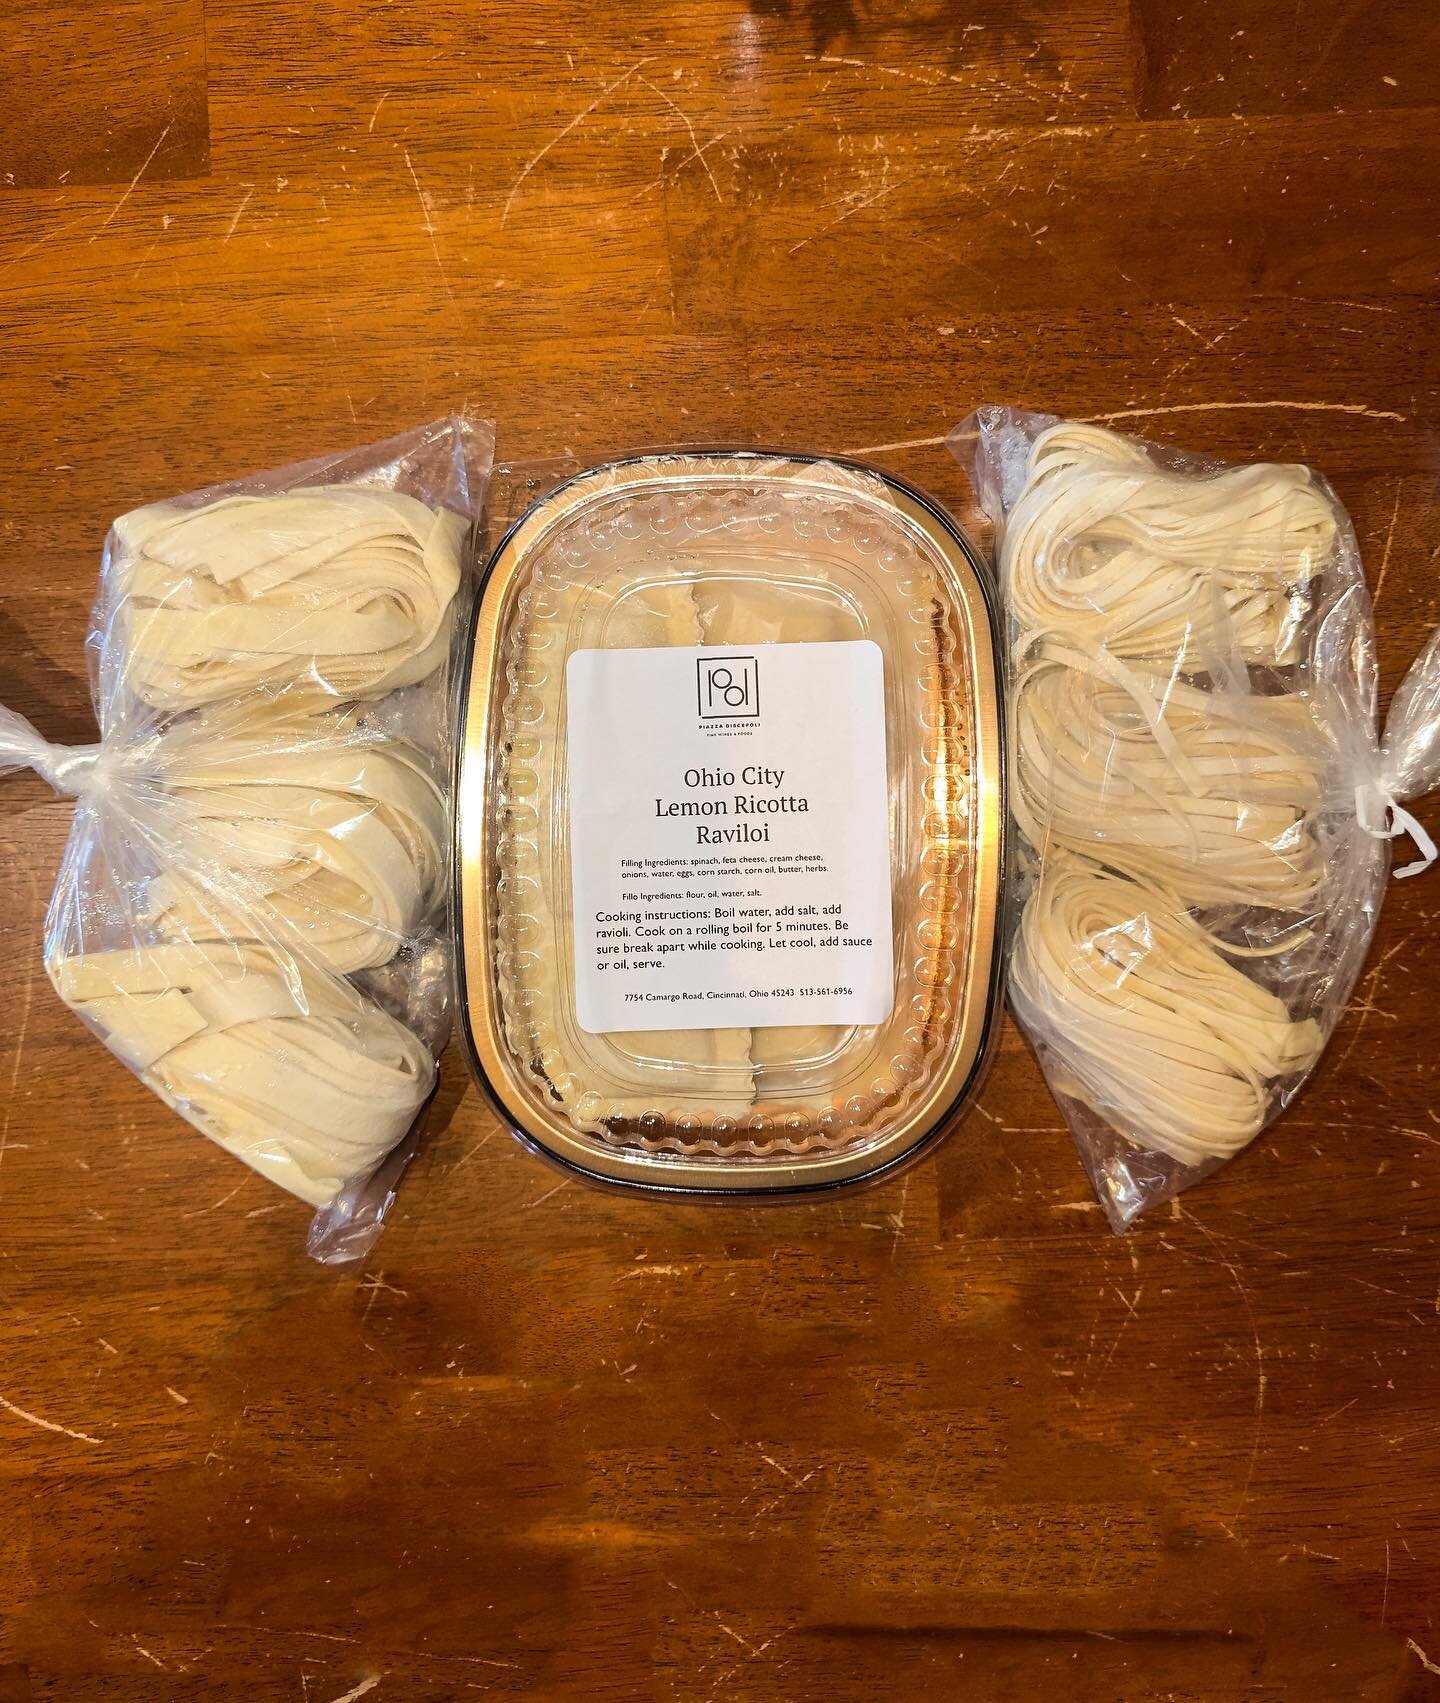 Did you know we carry fresh pasta? Ravioli, Pierogies,and assorted pasta shapes from @ohiocitypasta in Cleveland!
#pasta #italian #local #ohio